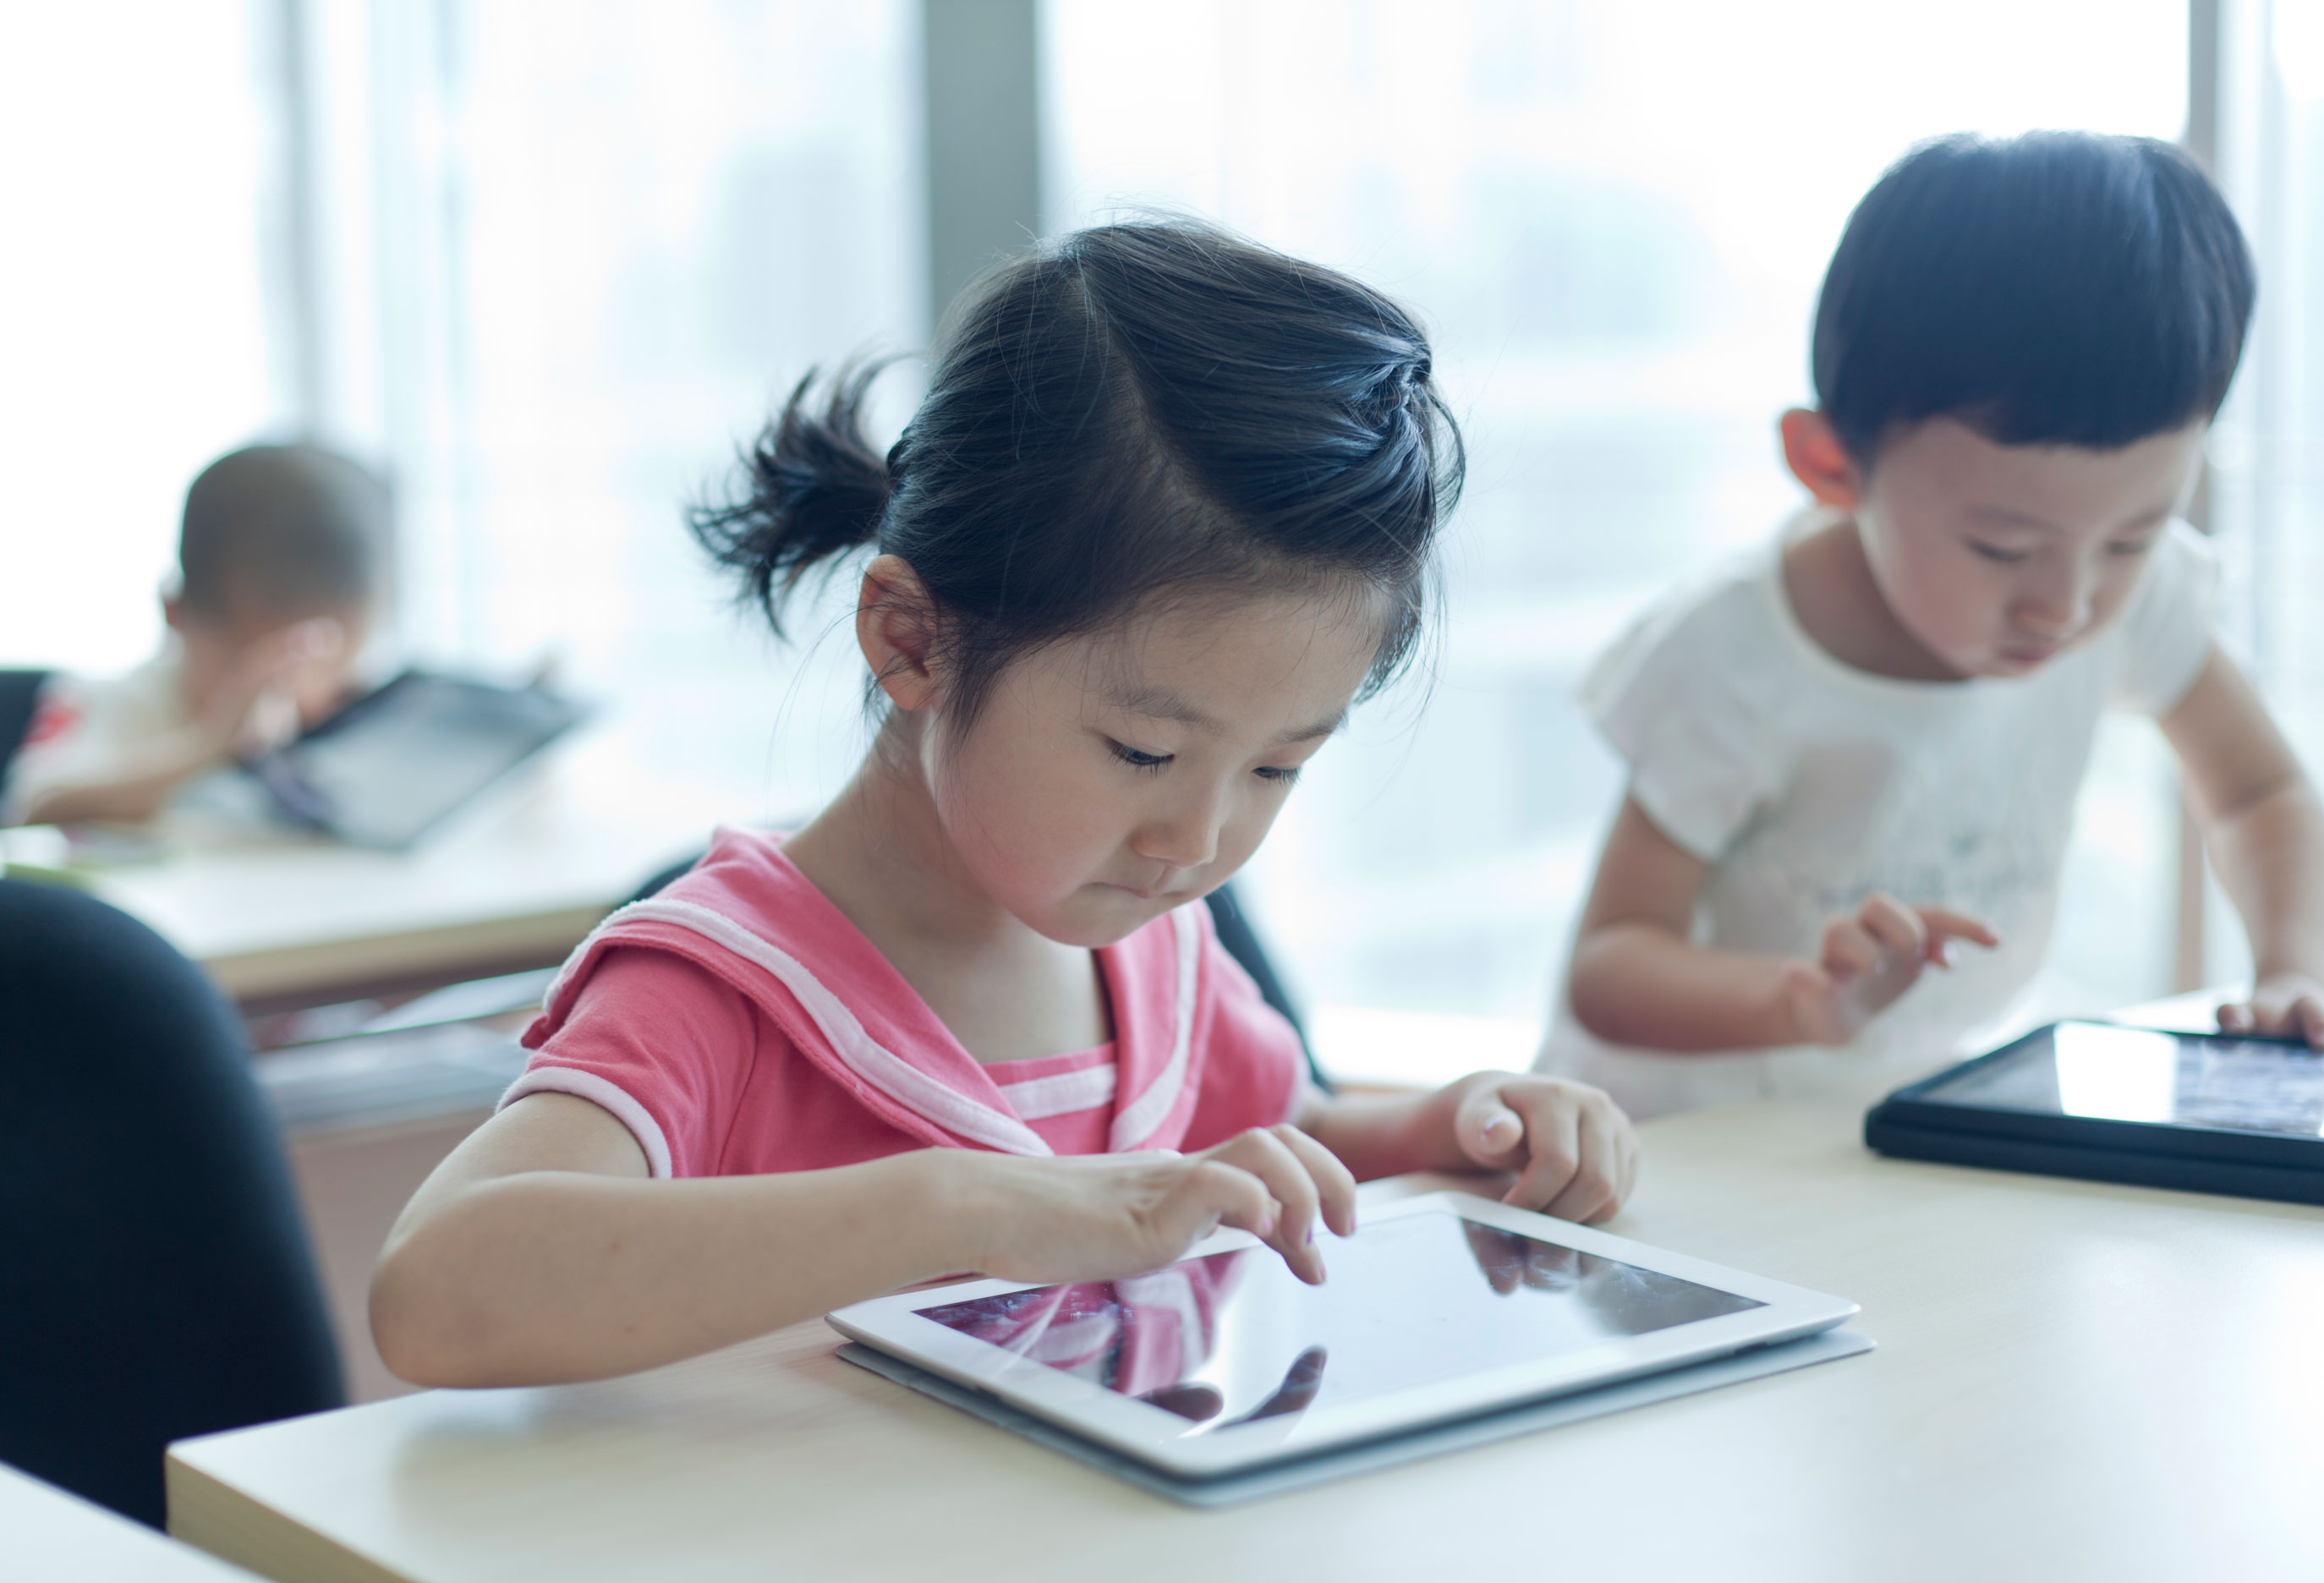 Animated, interactive digital books may help kids learn better | TechCrunch